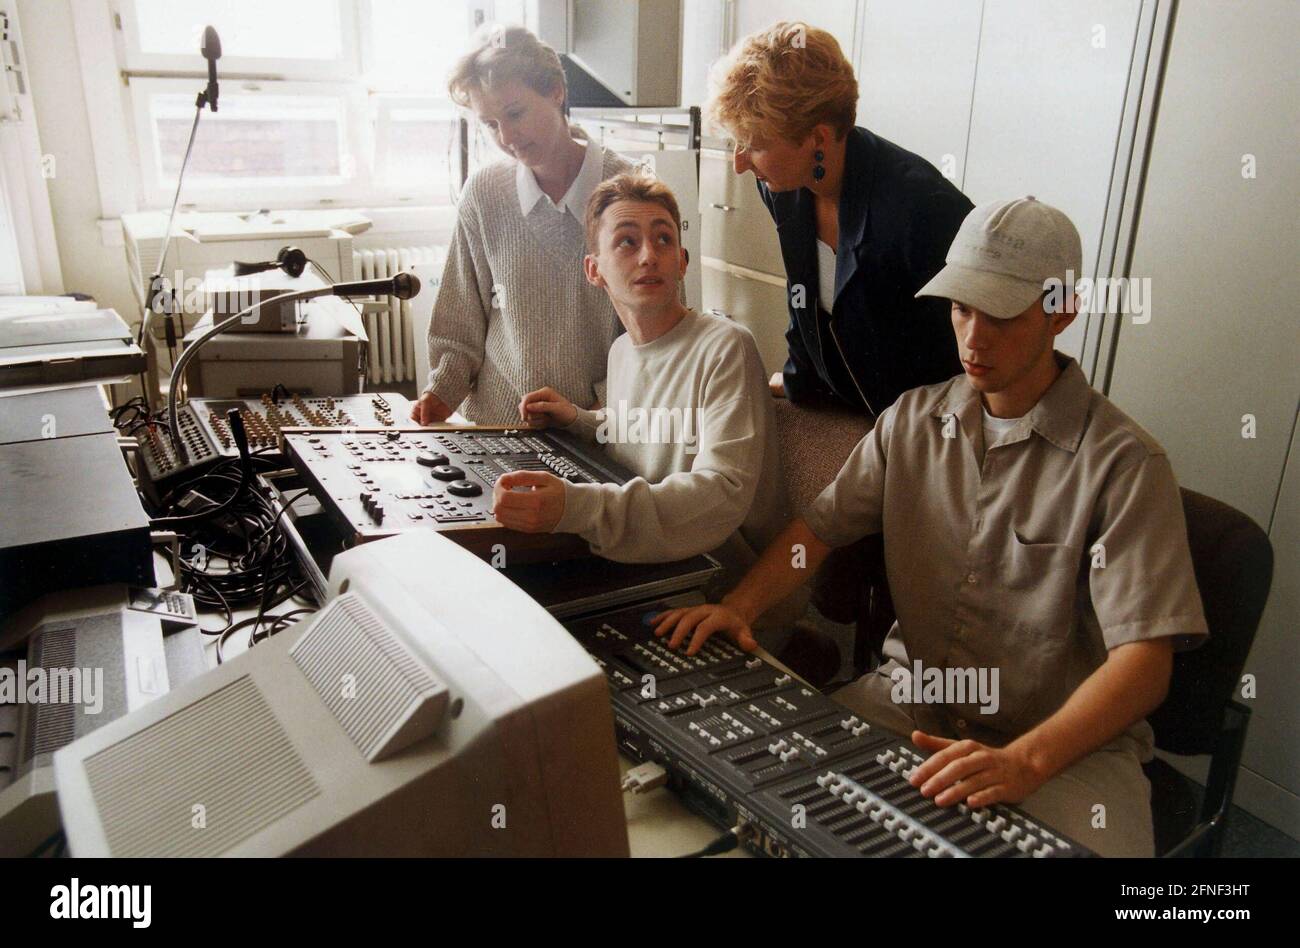 New apprenticeships: Event technology specialist training at the lighting control desk at Siemens in Berlin.n [automated translation] Stock Photo